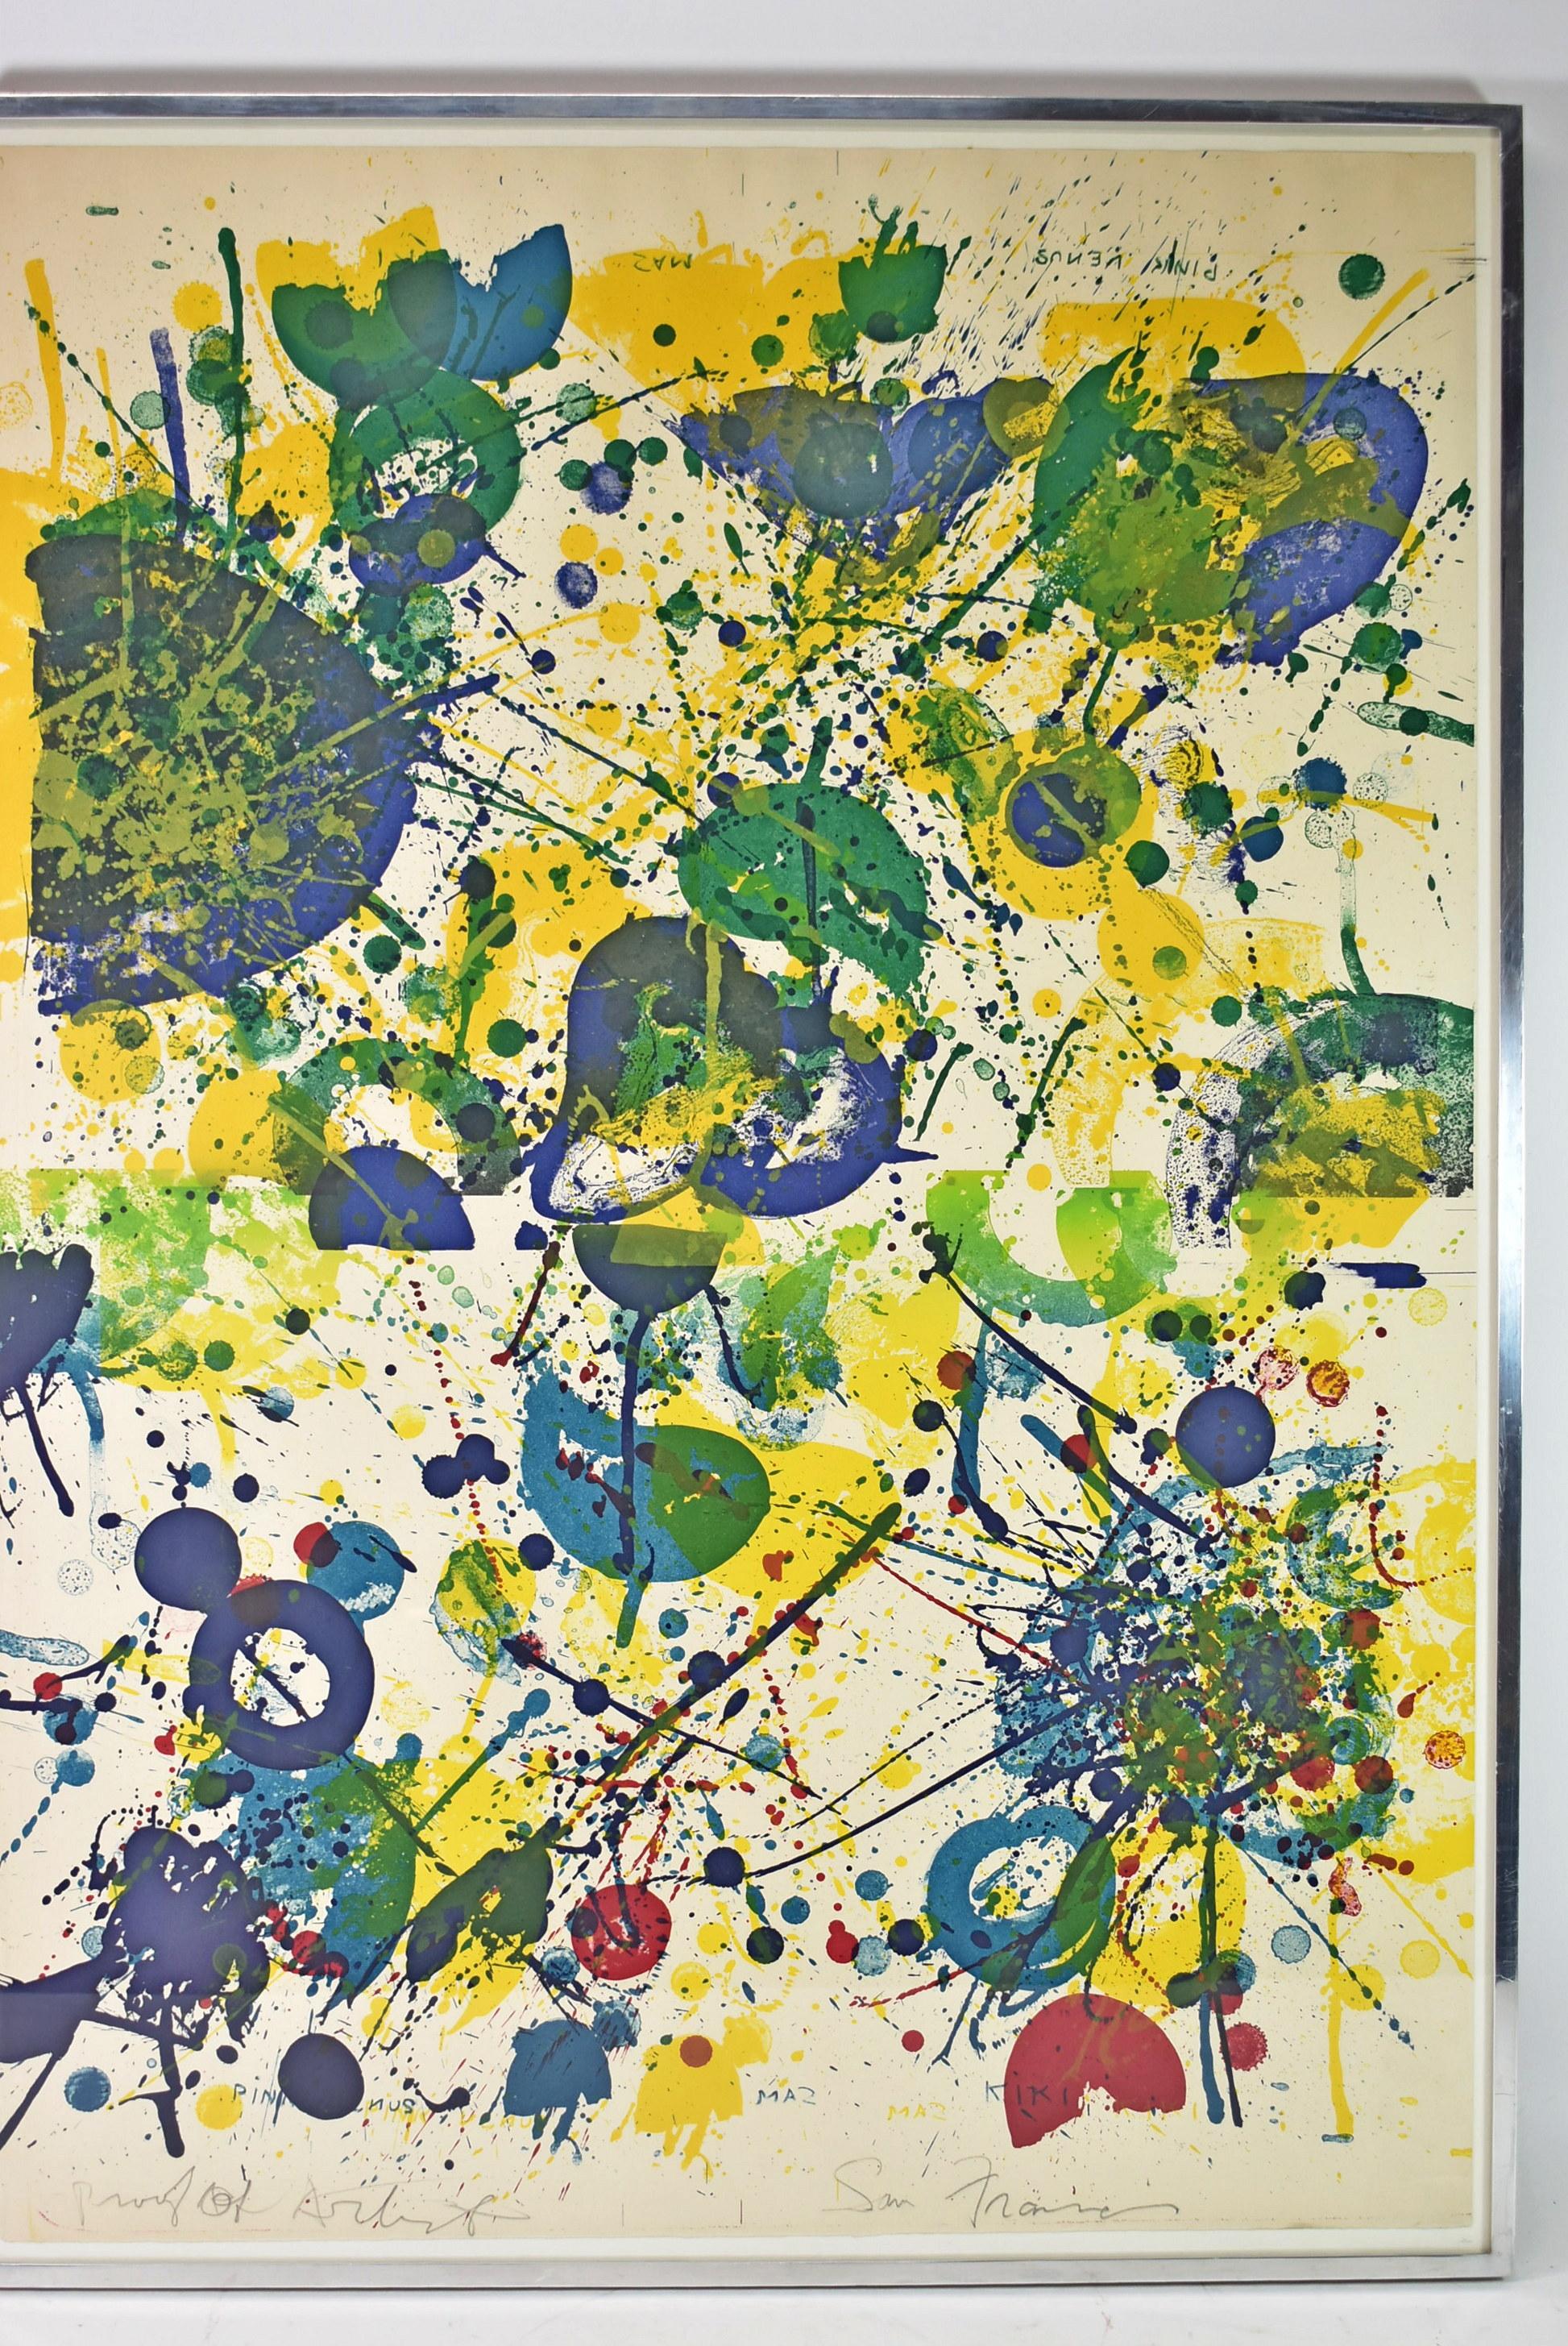 Sam Francis (American, 1923-1994) was dubbed 